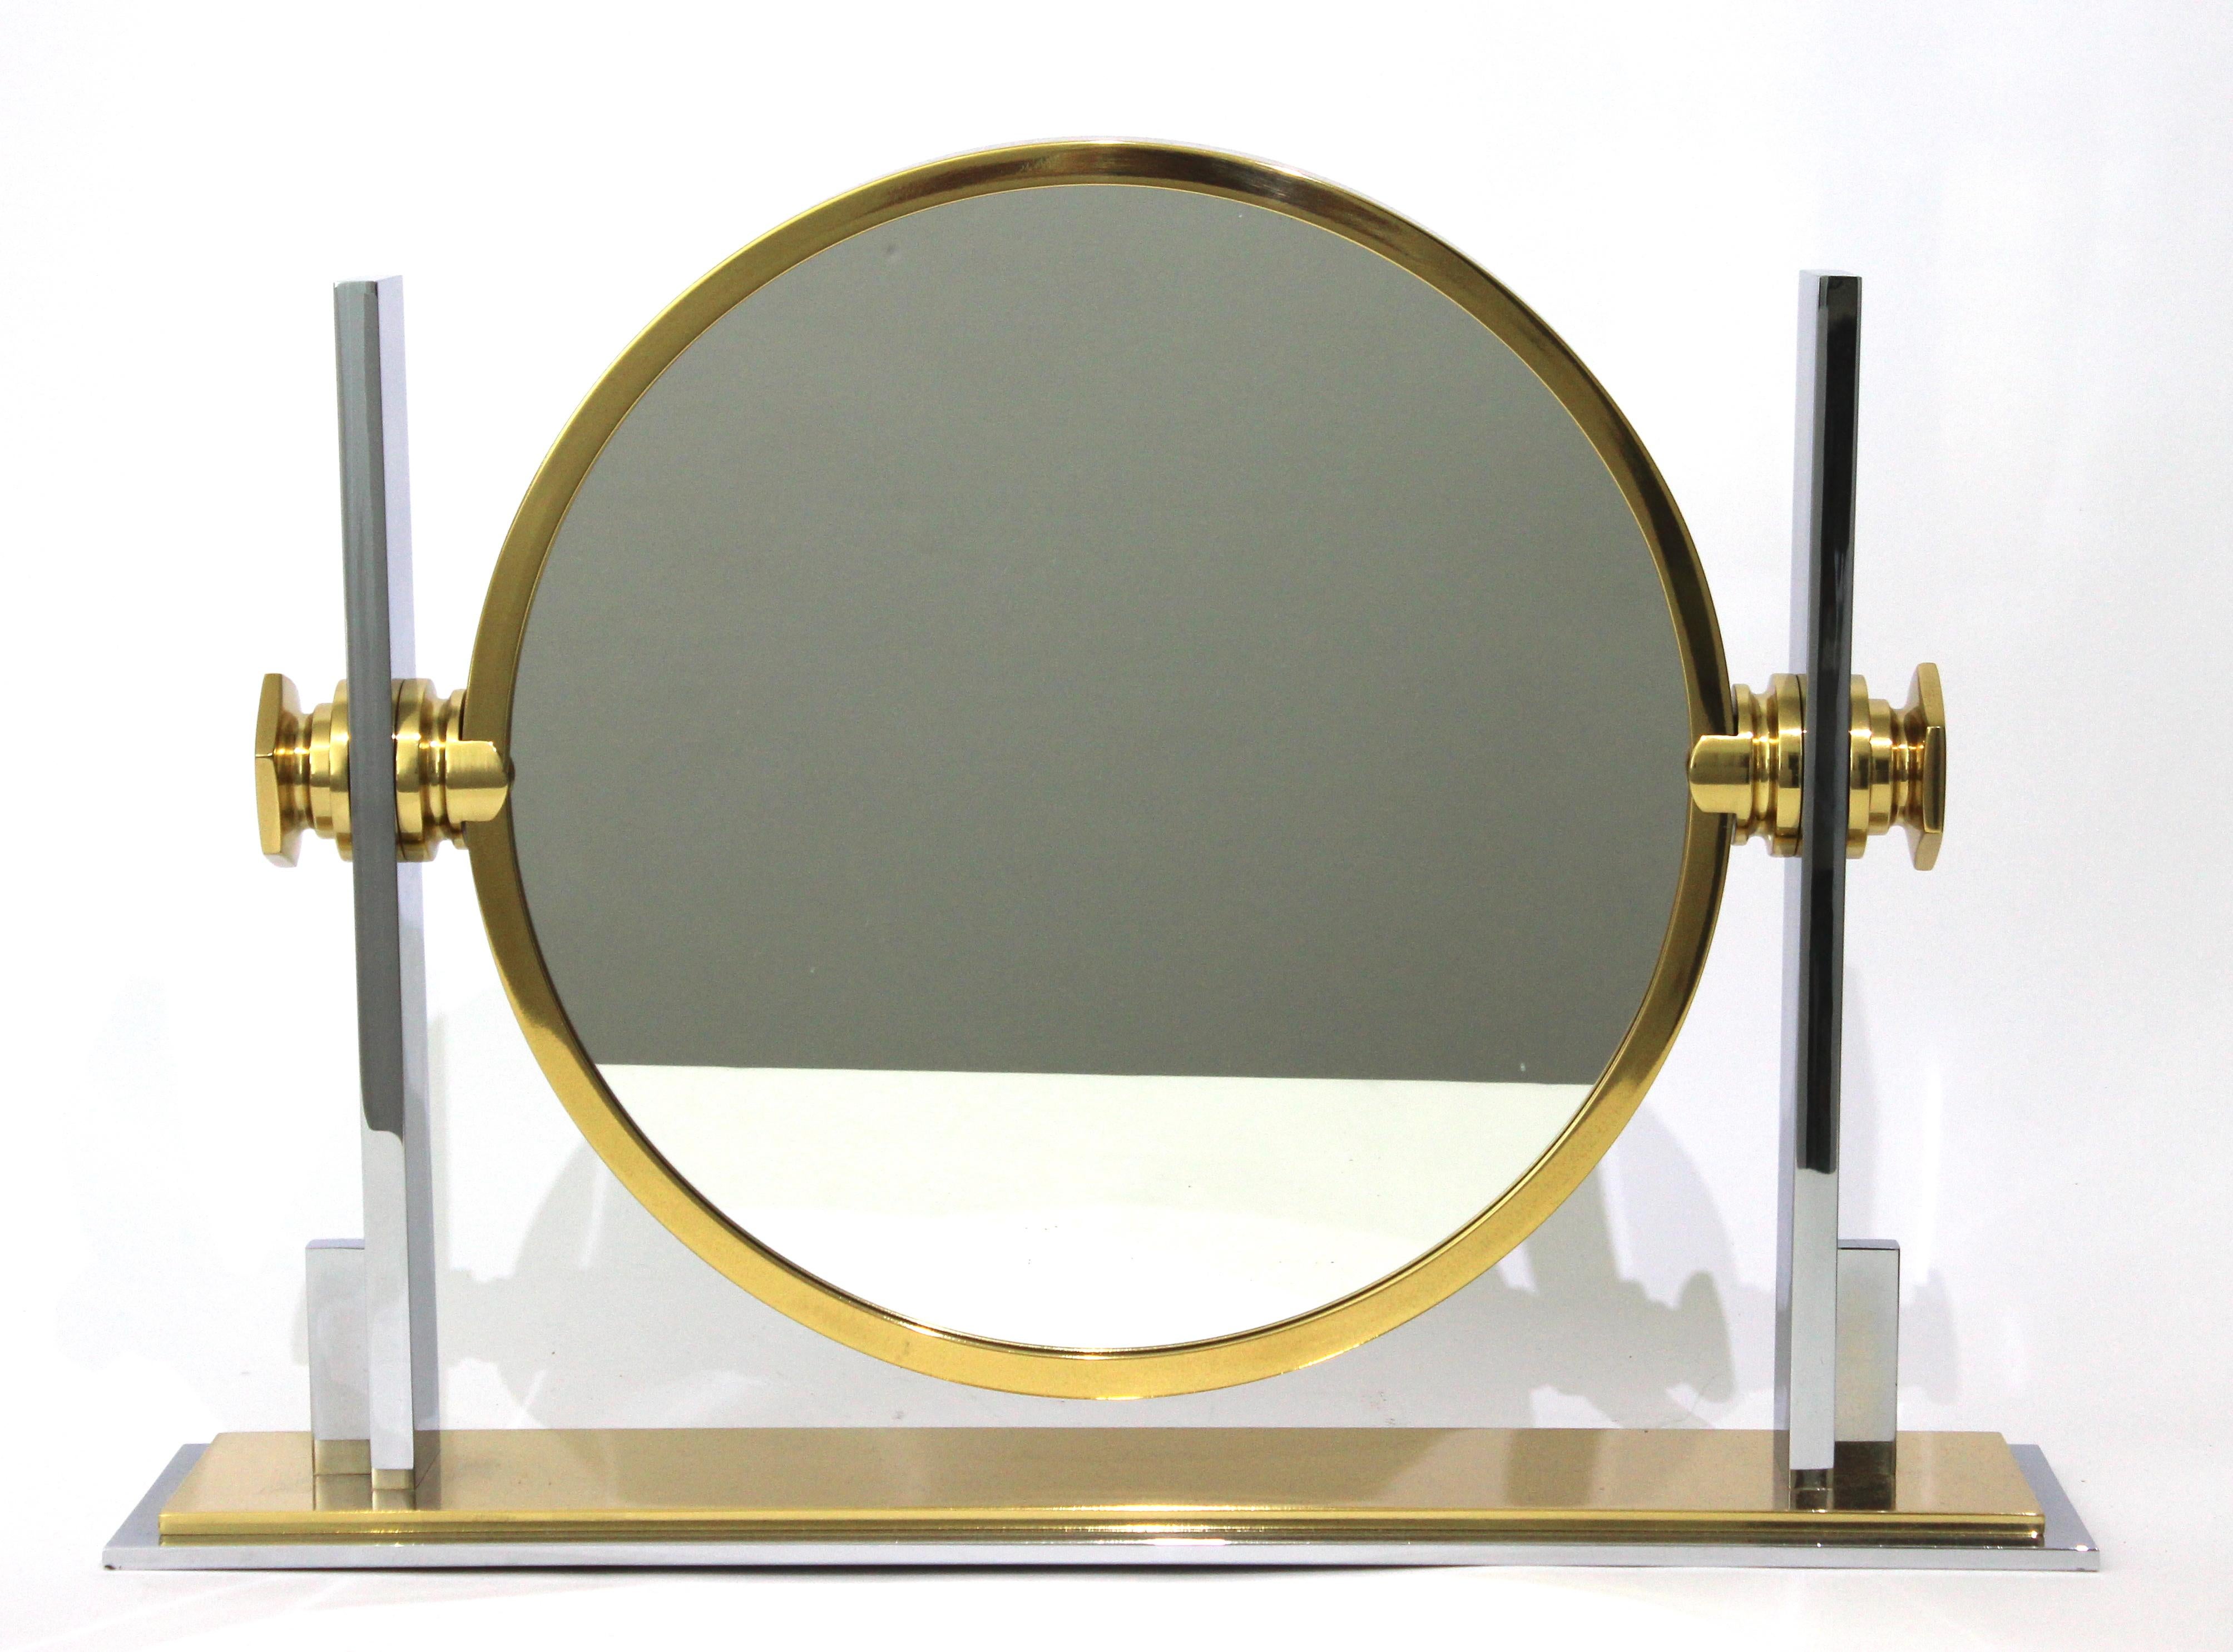 This iconic Karl Springer Art Deco inspired vanity make-up mirror dates to the 1970s-1980s and will make a definite statement with its form and use of materials.

Note: One mirror has normal magnification and the other side is concave and